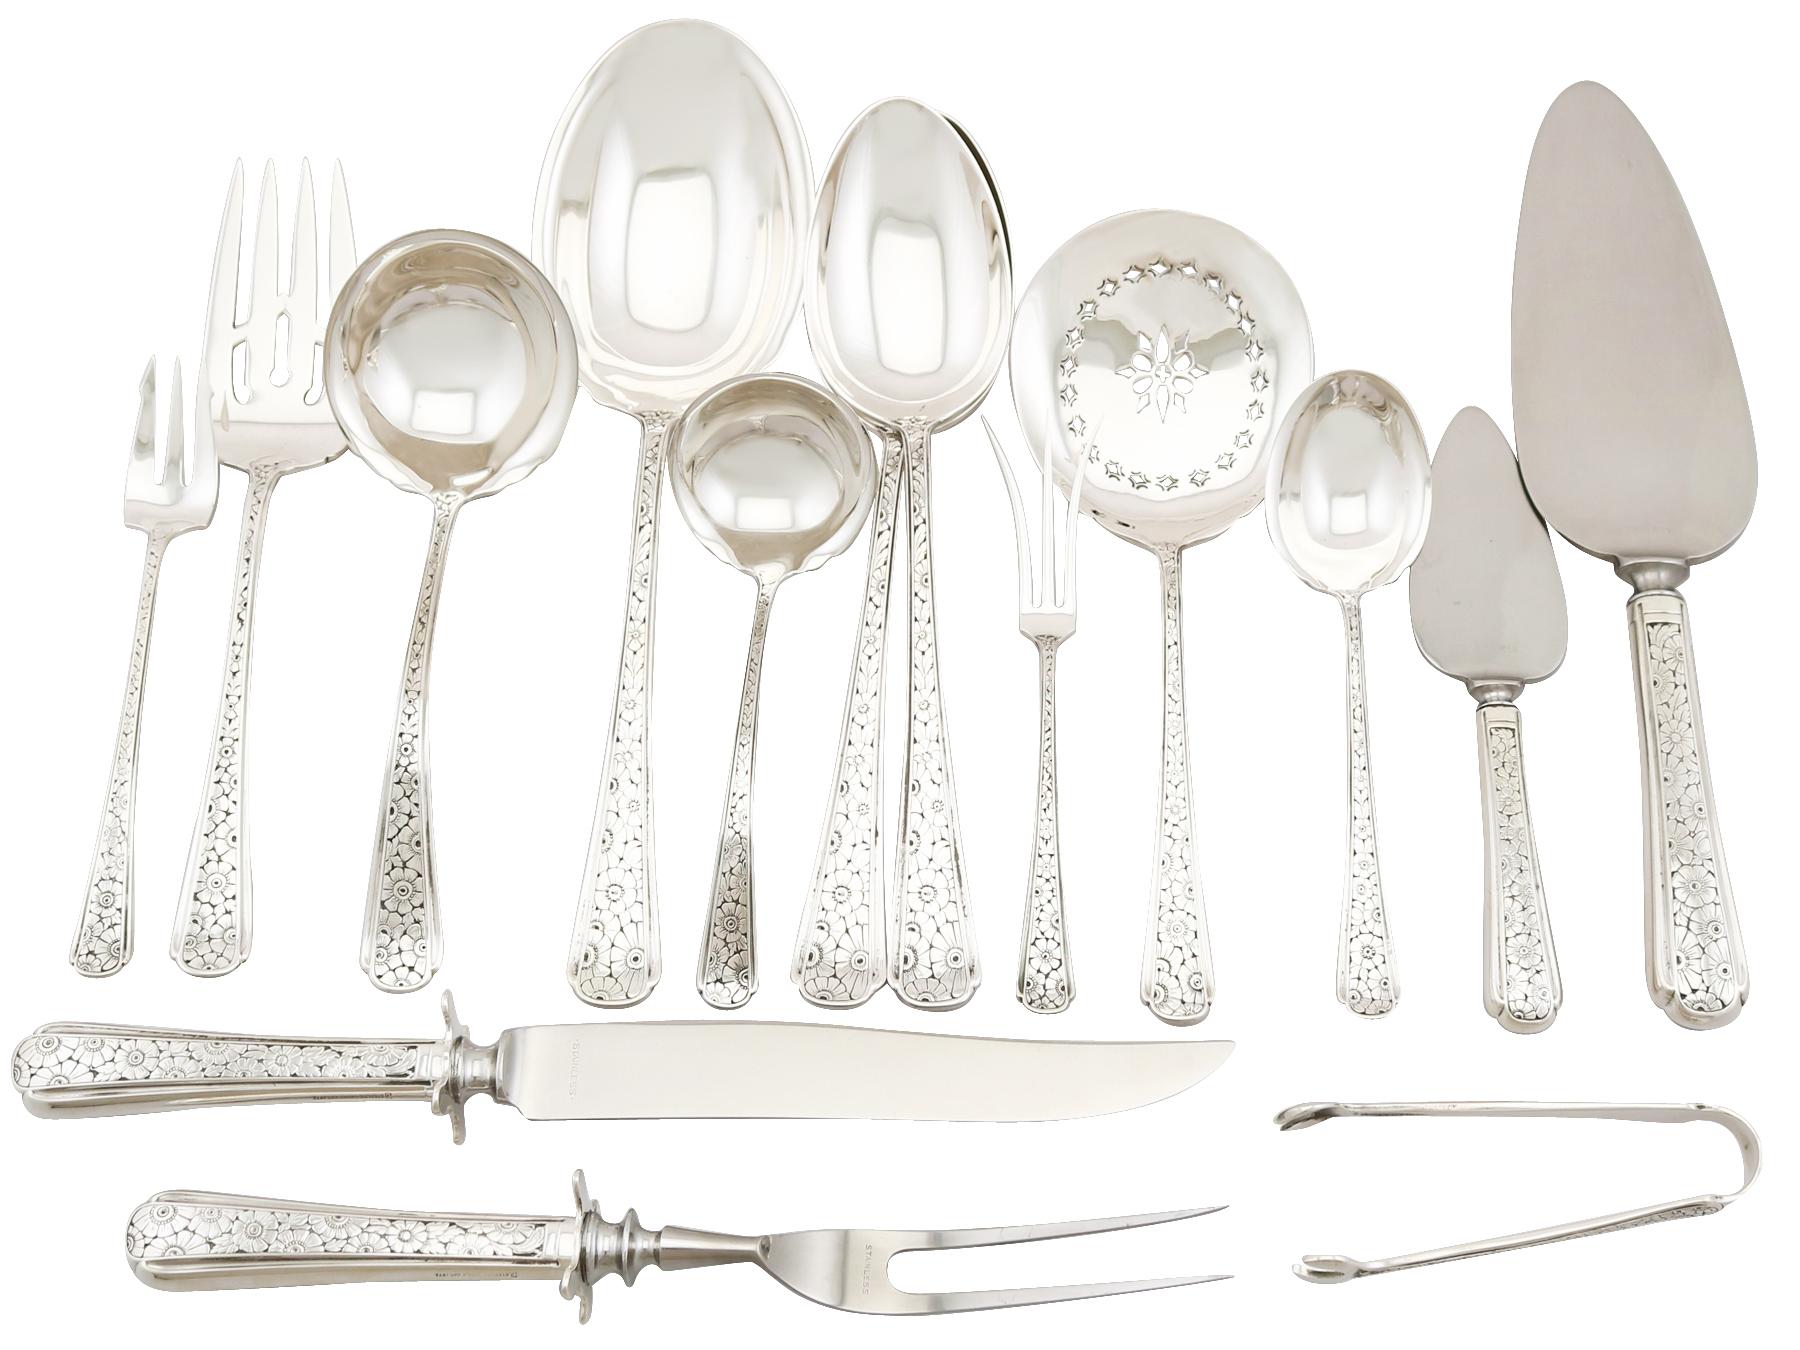 An exceptional, fine and impressive vintage American sterling silver old Brocade pattern flatware service for six persons; an addition to our canteen of cutlery collection.

The pieces of this exceptional vintage American sterling silver flatware